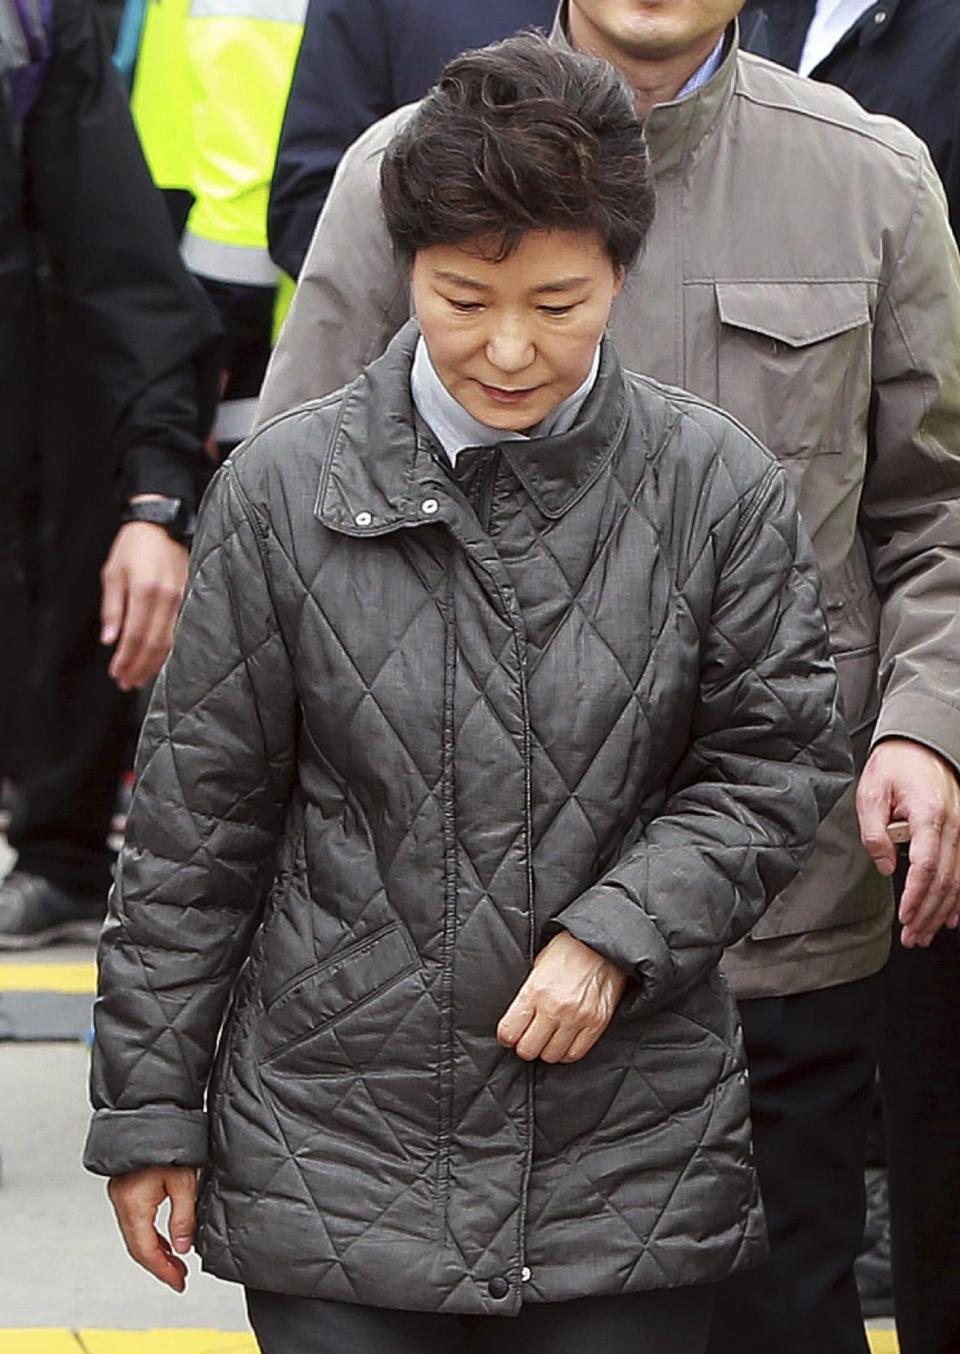 South Korean President Park Geun-hye leaves after meeting with relatives of passengers aboard the sunken ferry Sewol at a port in Jindo, South Korea, Sunday, May 4, 2014. Divers battled strong currents and wind Saturday to search unopened rooms in the sunken South Korean ferry for dozens of missing passengers, officials said Saturday. (AP Photo/Yonhap) KOREA OUT